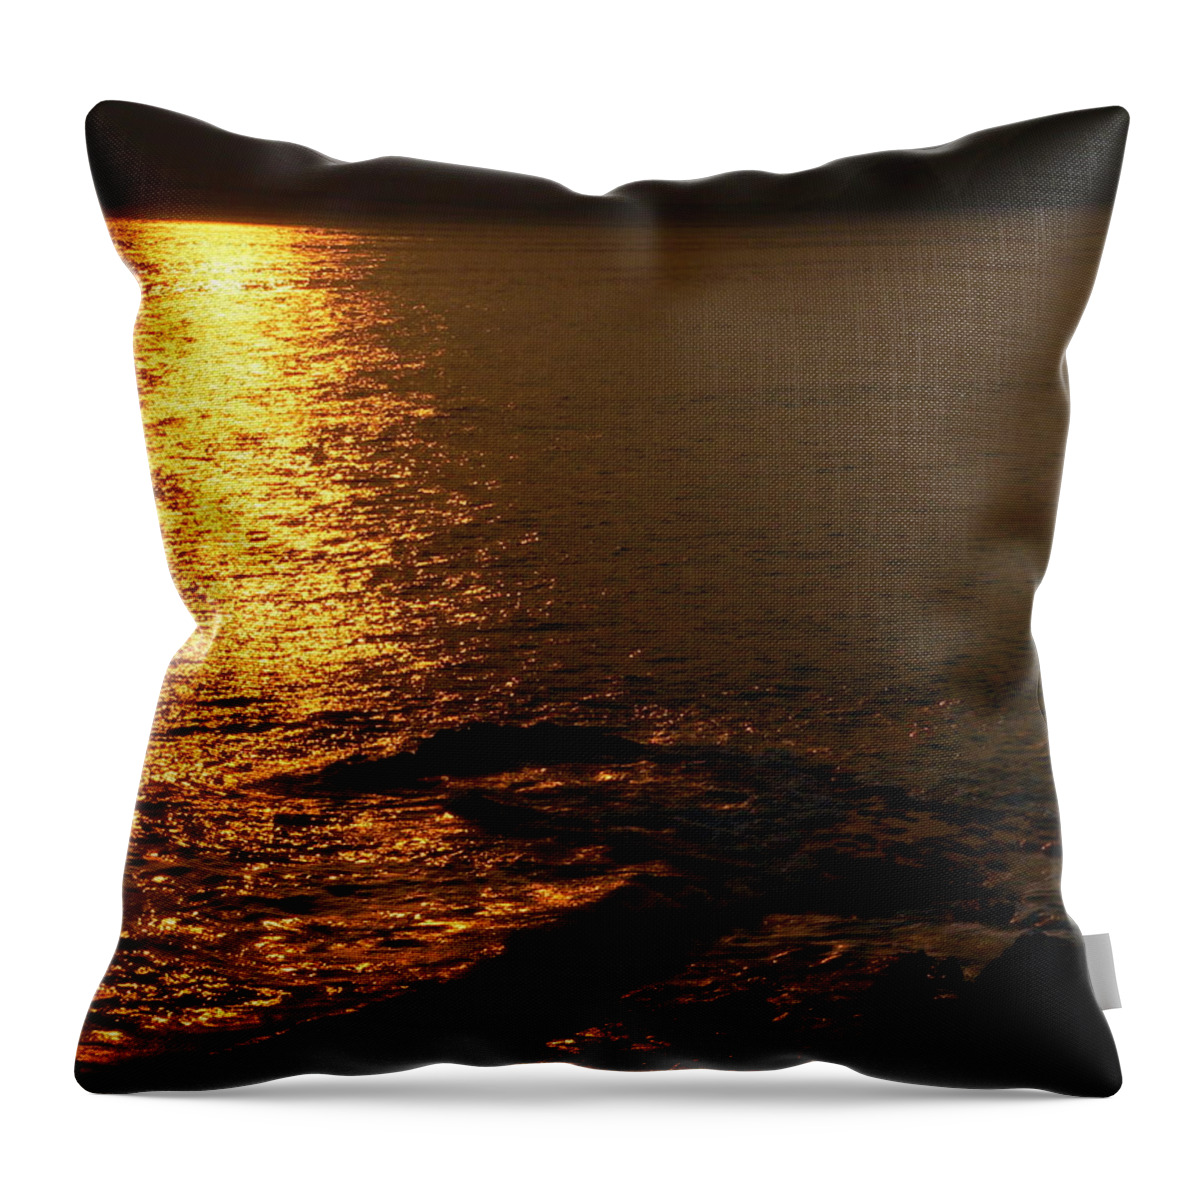 Golden Sunset Throw Pillow featuring the photograph Golden Sunset On The Sea by Jeff Lowe